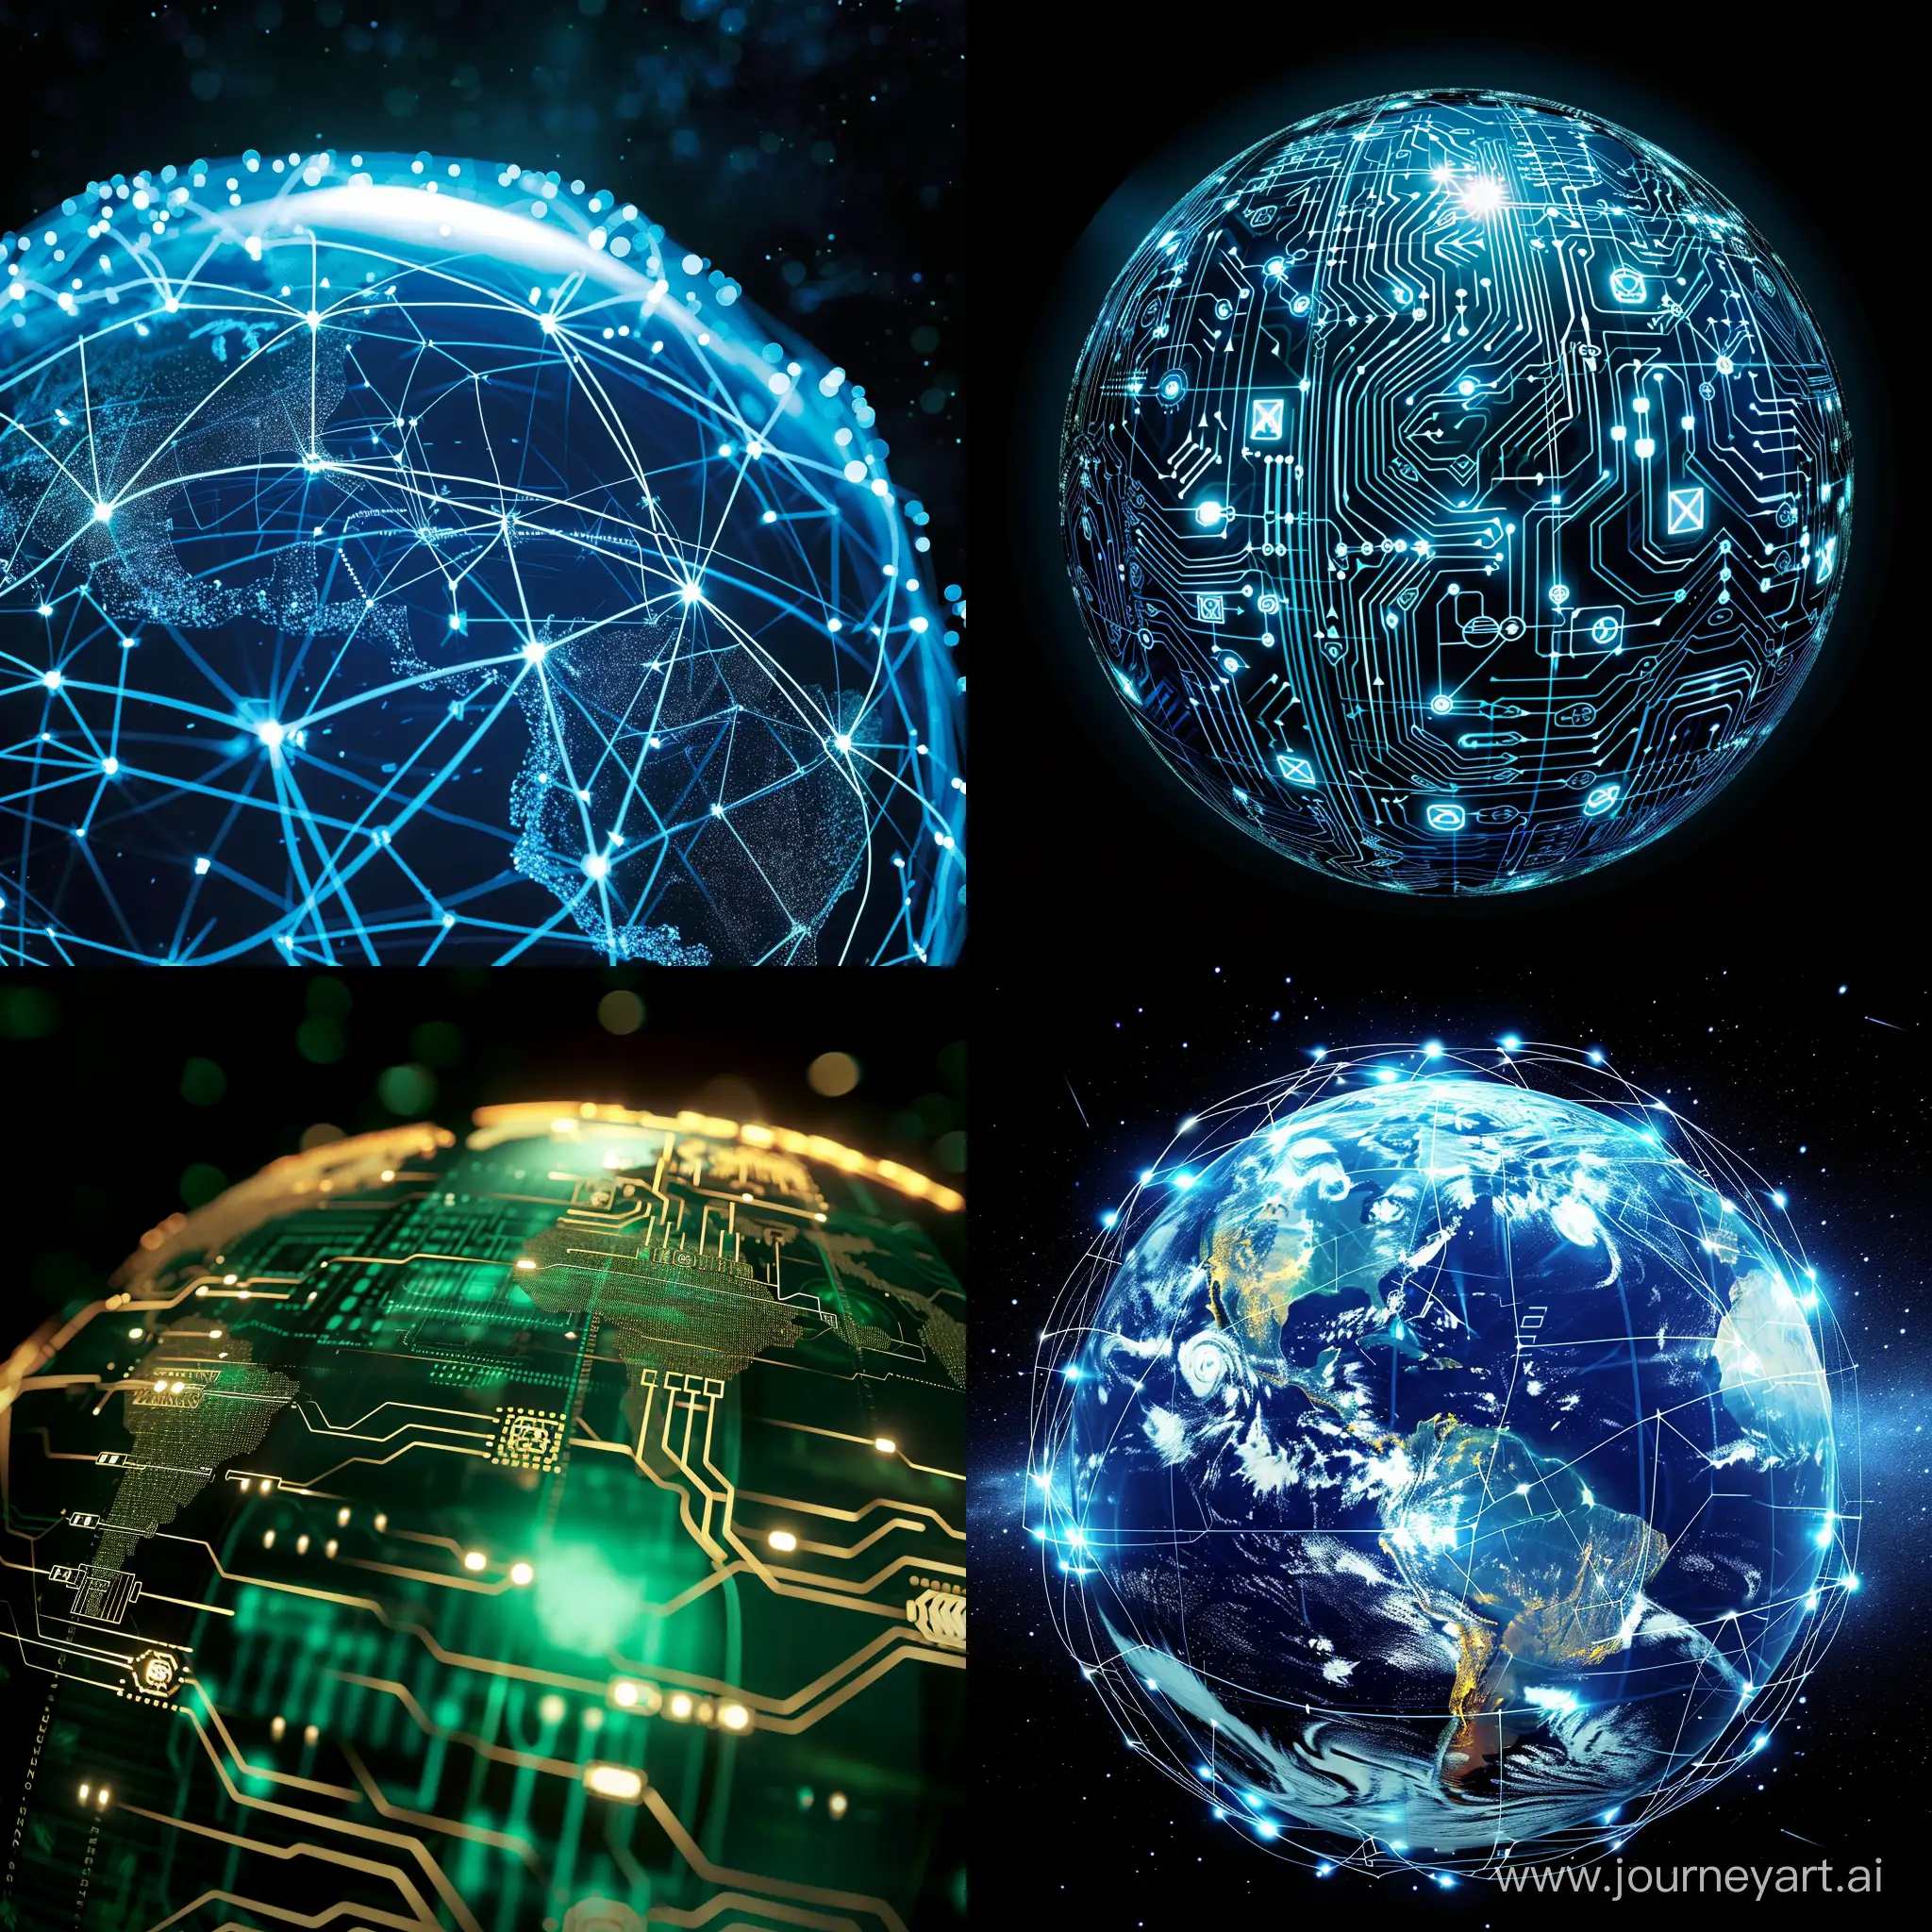 Image of a globe with interconnected circuits